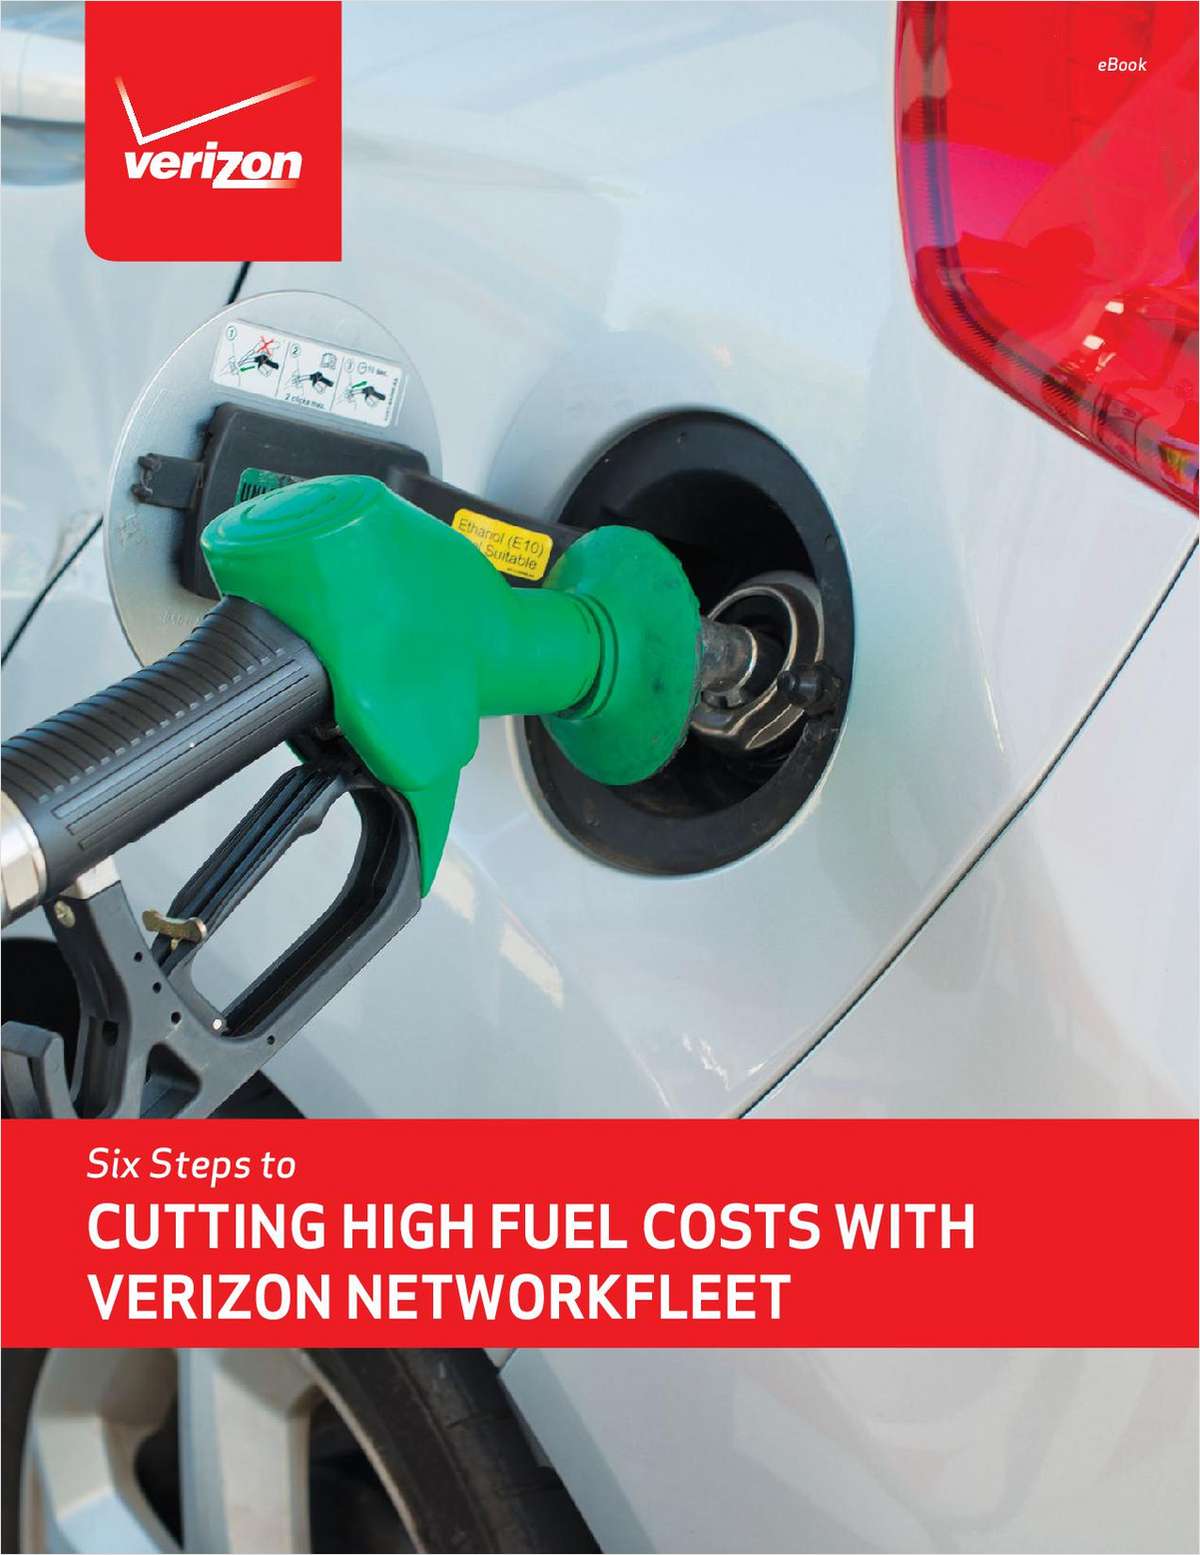 6 Steps to Cutting High Fuels Costs on Your Company Vehicles